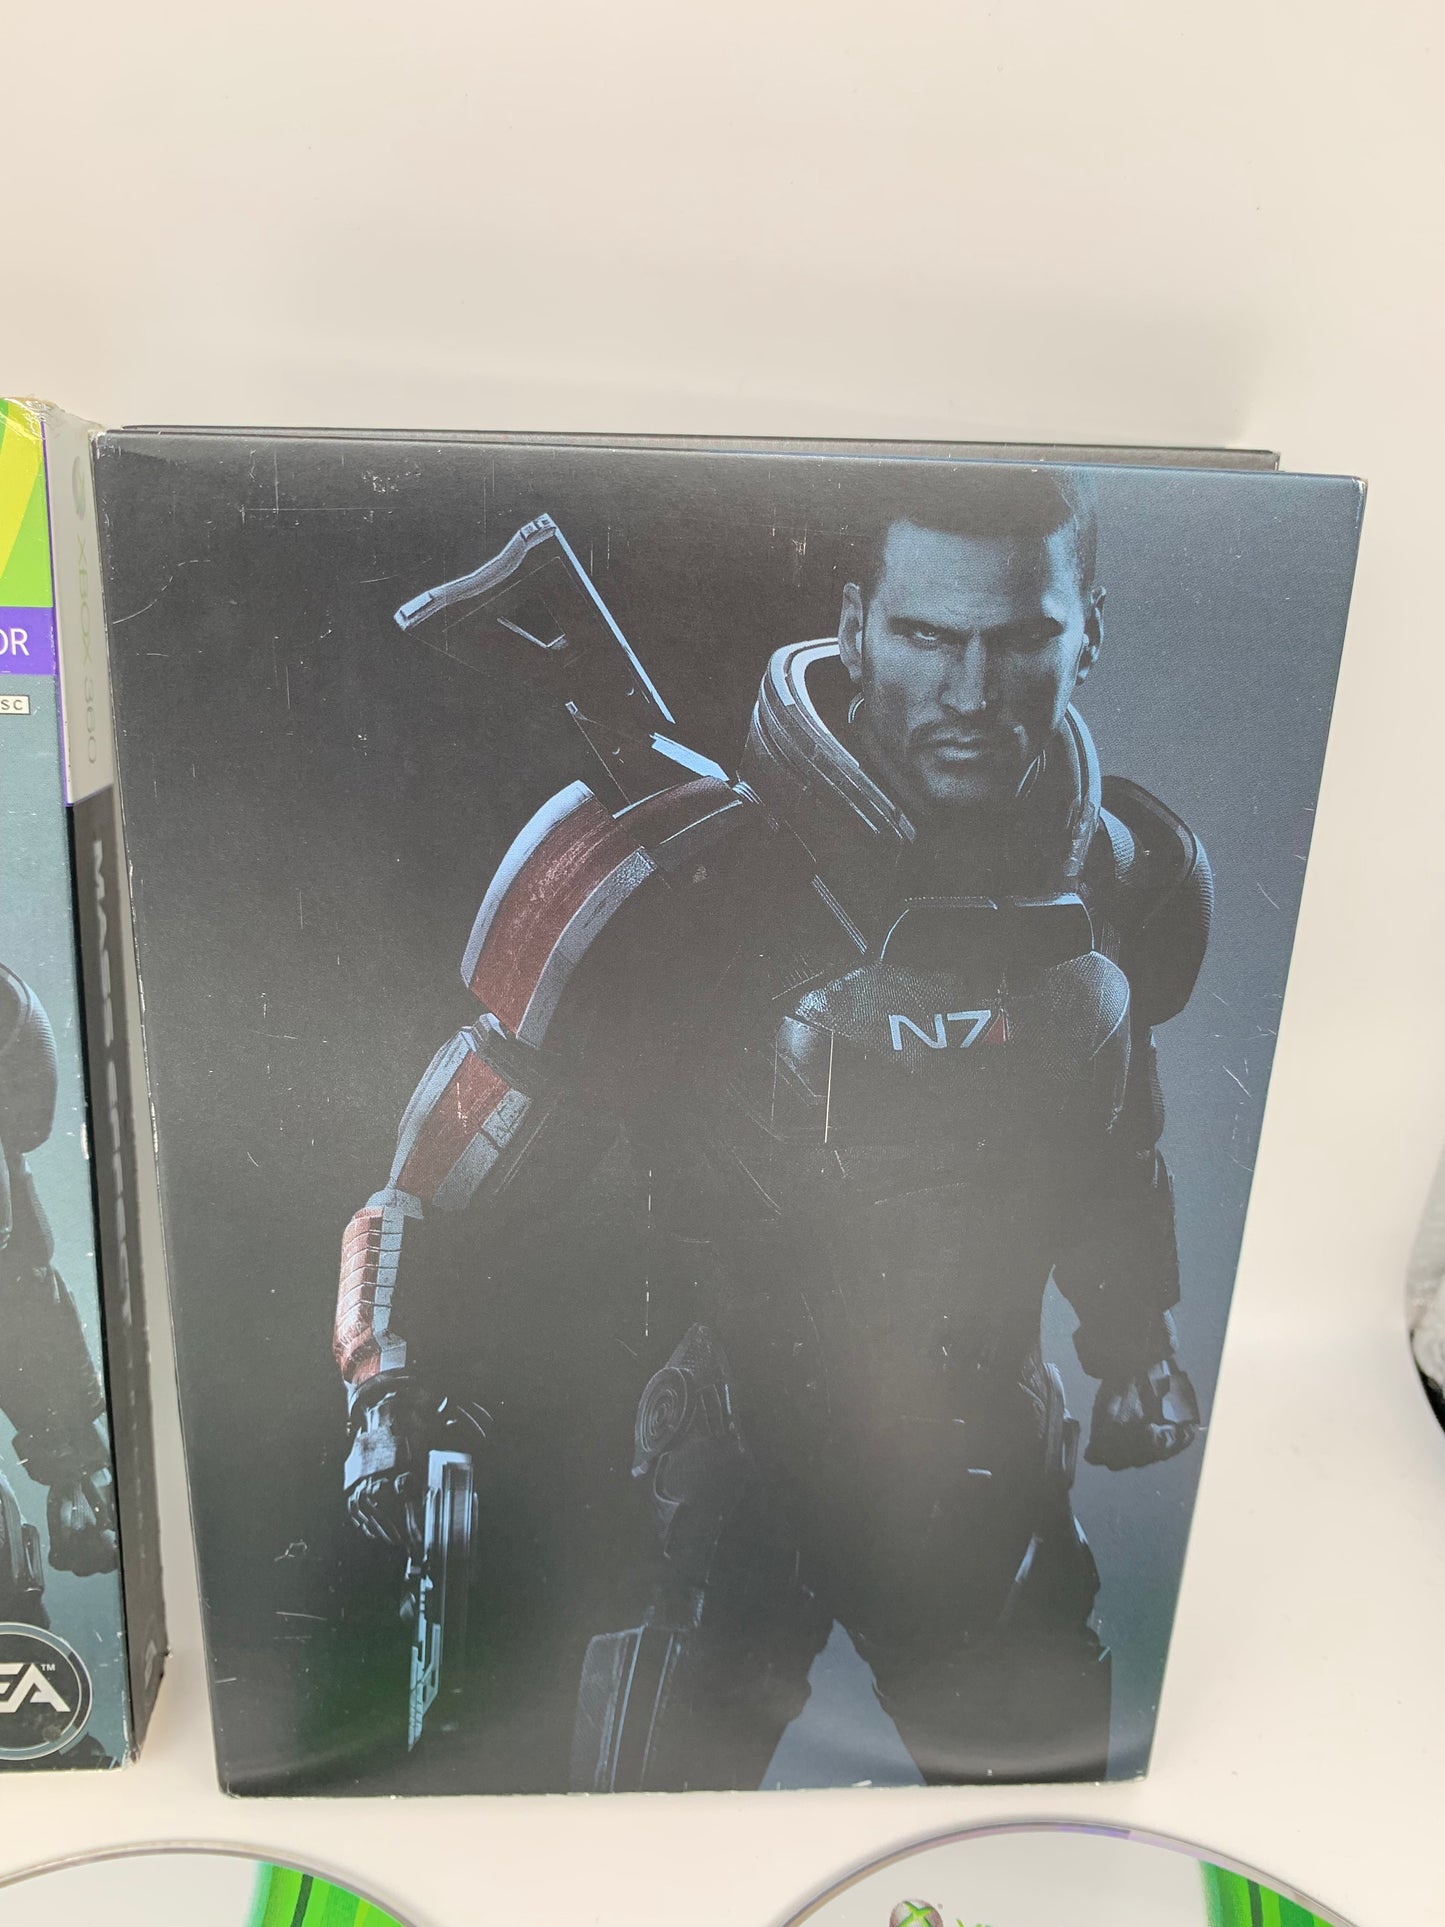 MiCROSOFT XBOX 360 | MASS EFFECT TRiLOGY | LiMiTED EDiTiON STEELCASE